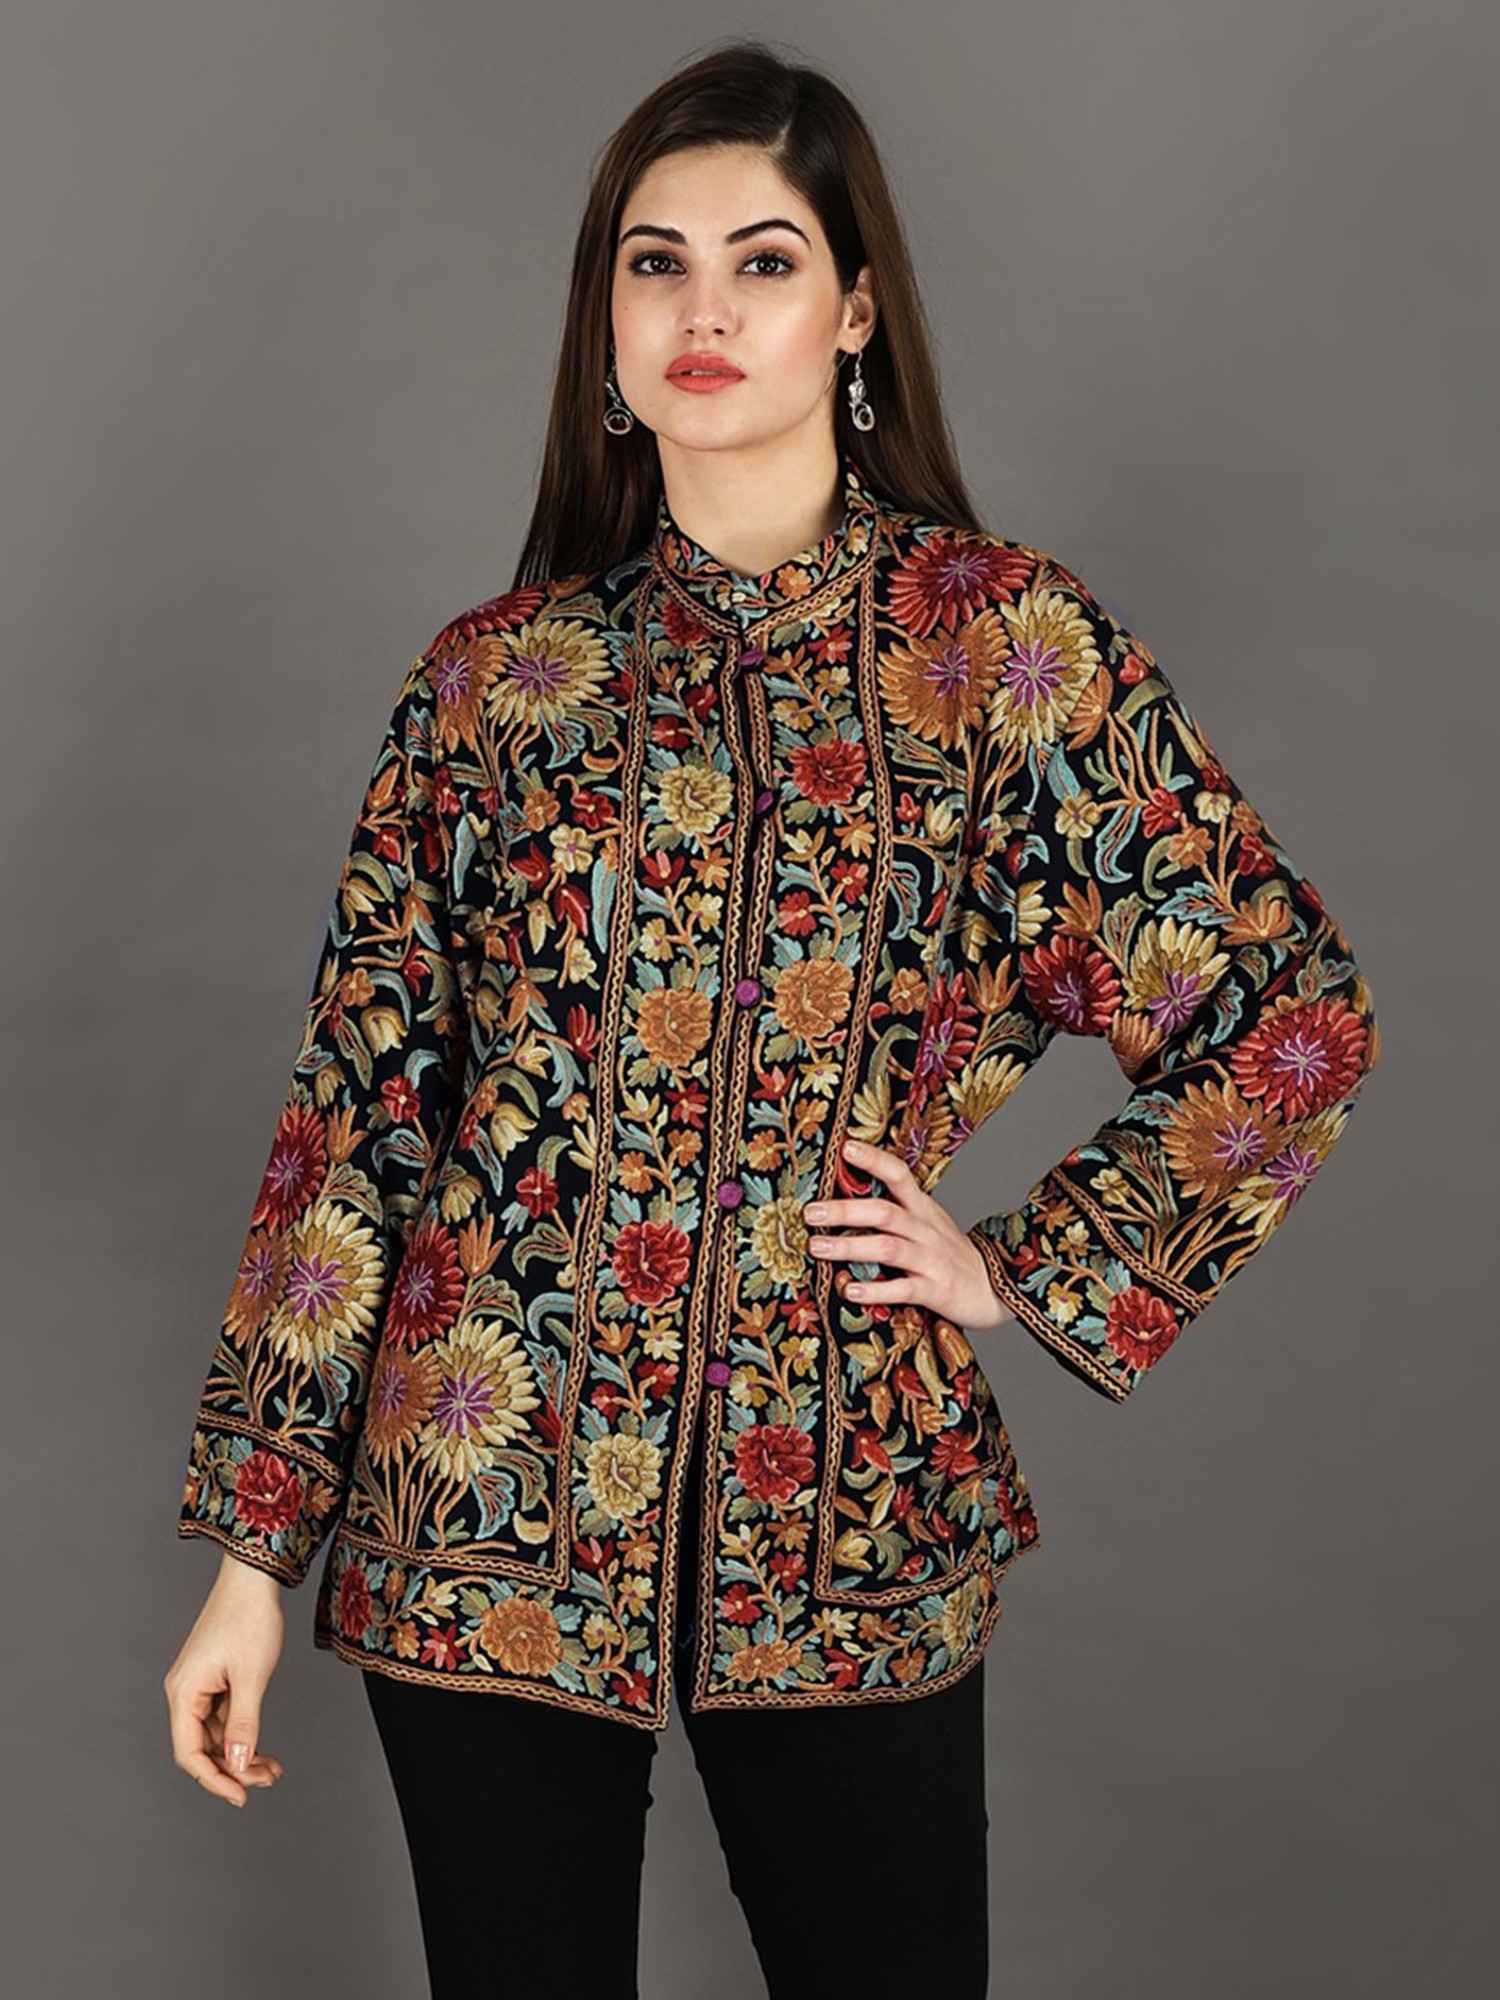 Black-Beauty Pure-Wool Short Jacket From Kashmir With Giant Aari ...